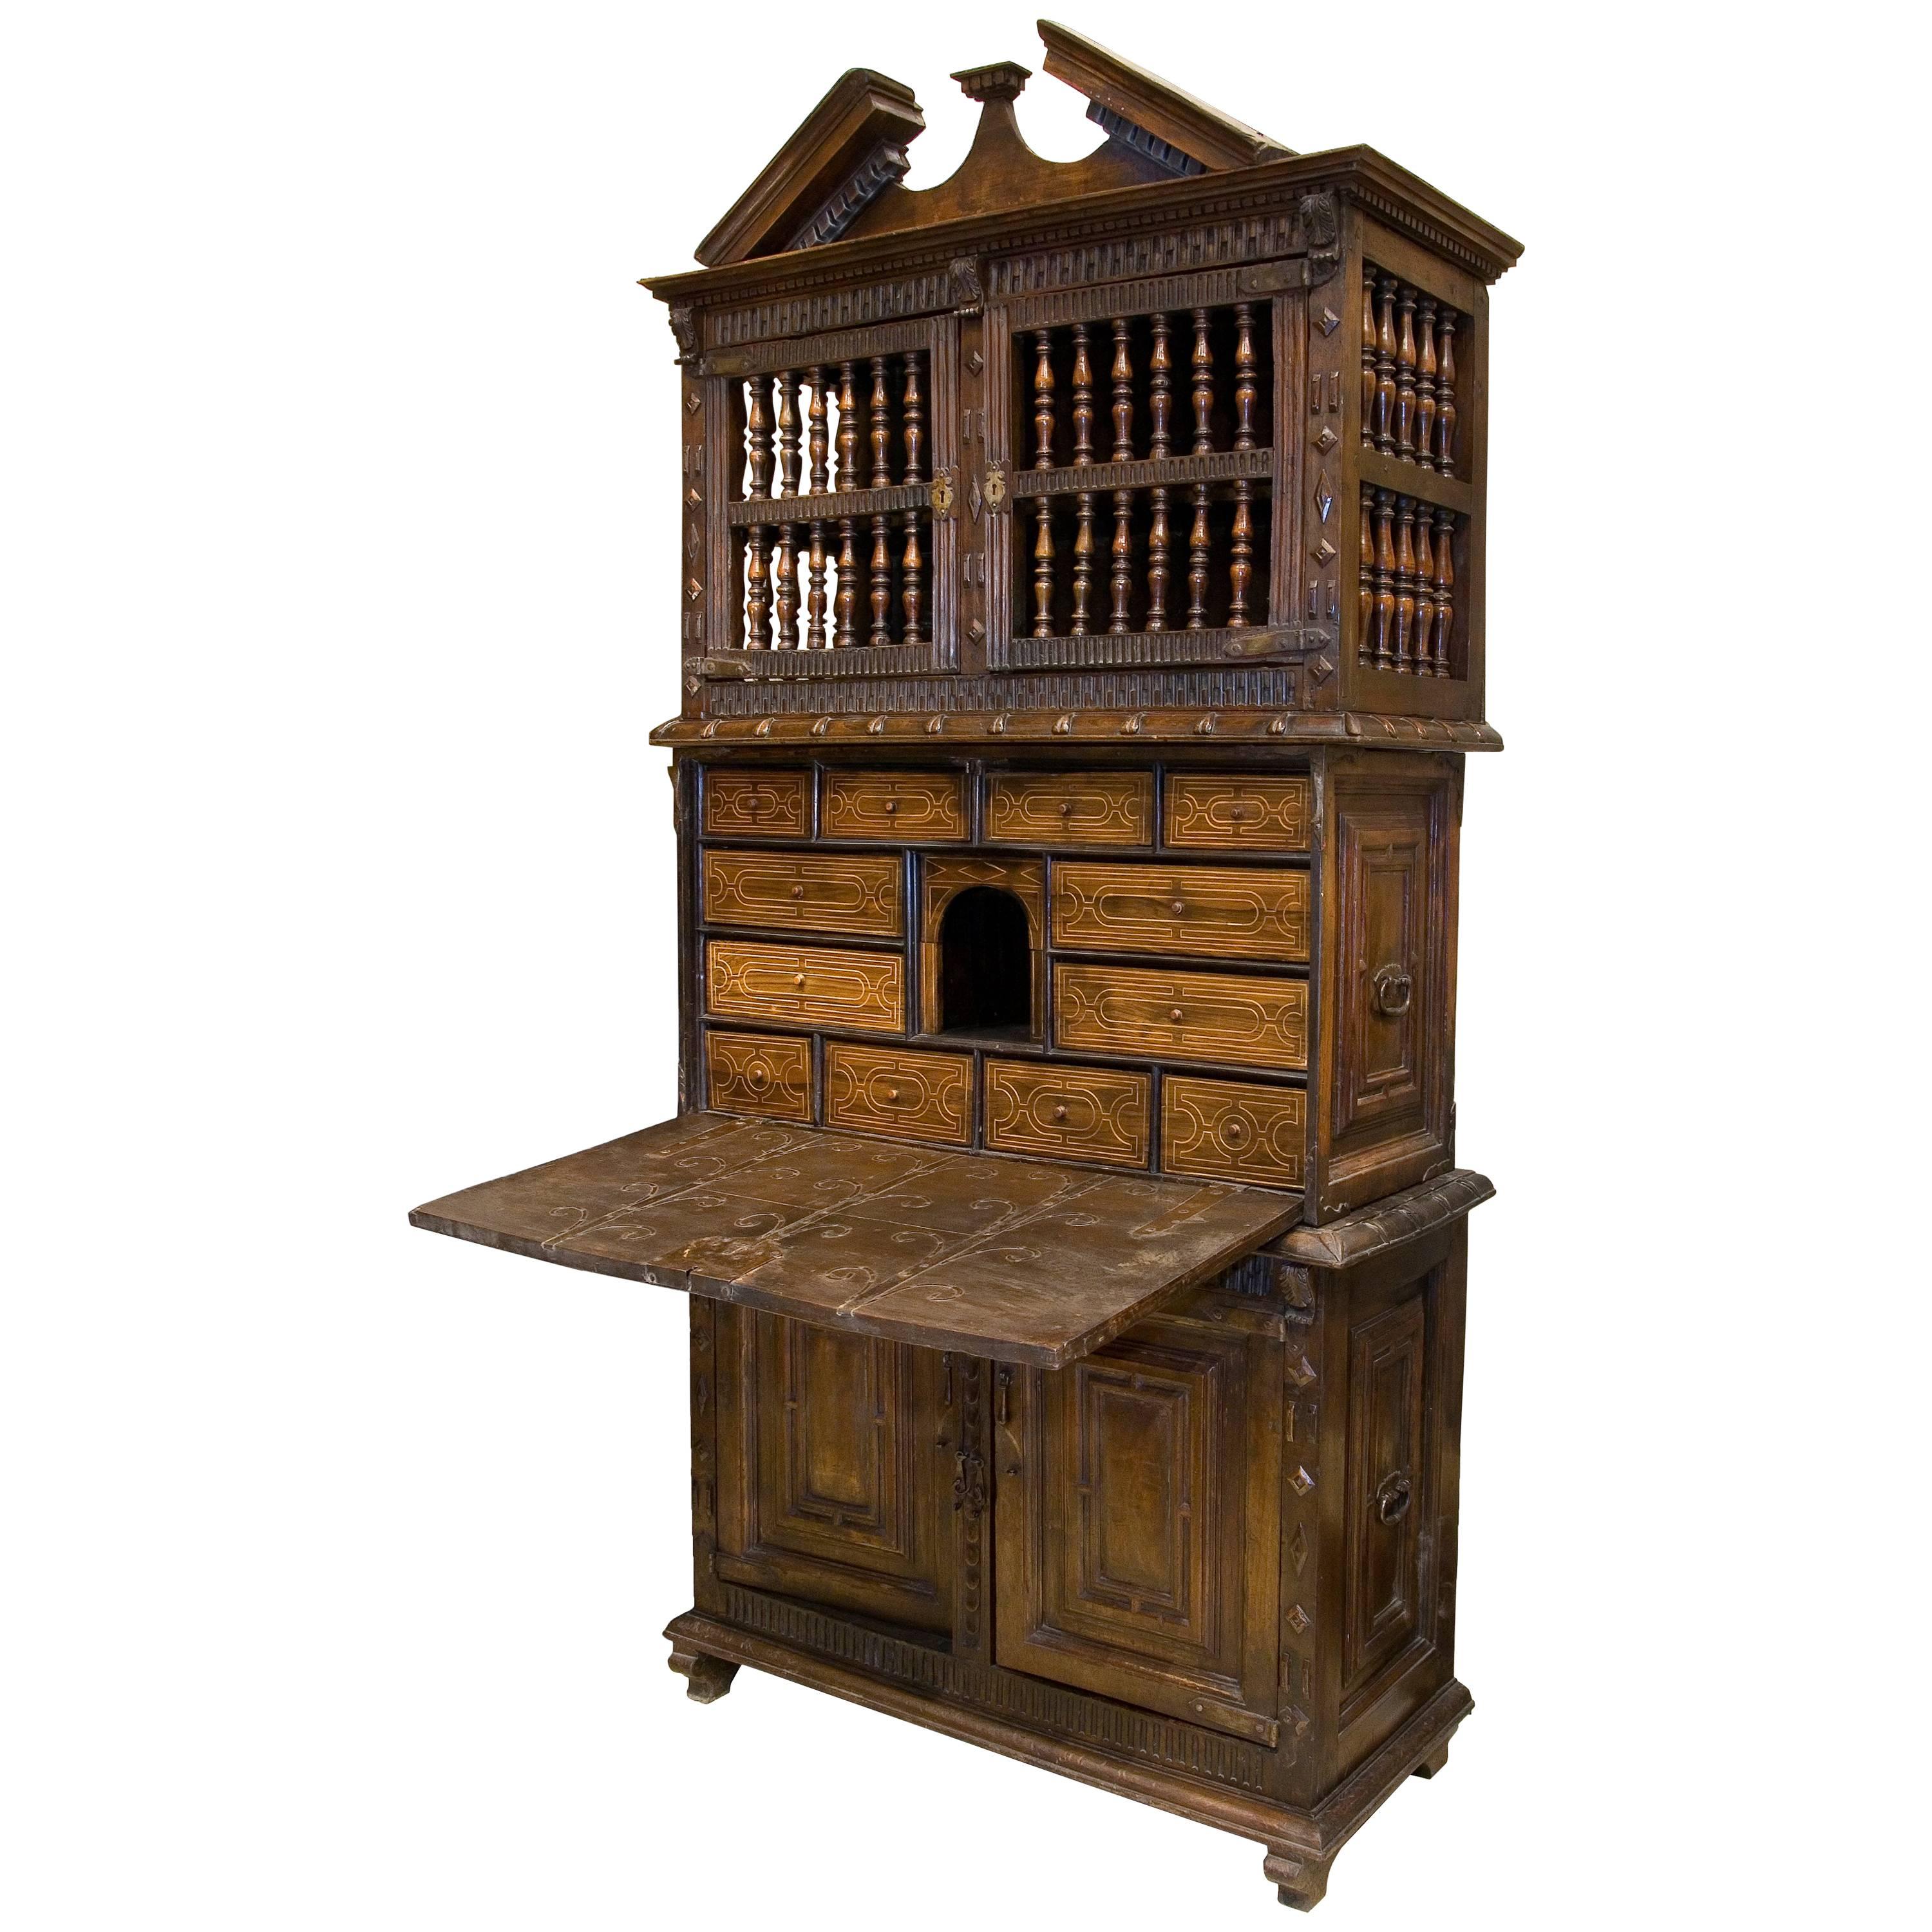 Cupboard with Writing Desk, Wood, Wrought Iron, Asturias, Spain 17th Century